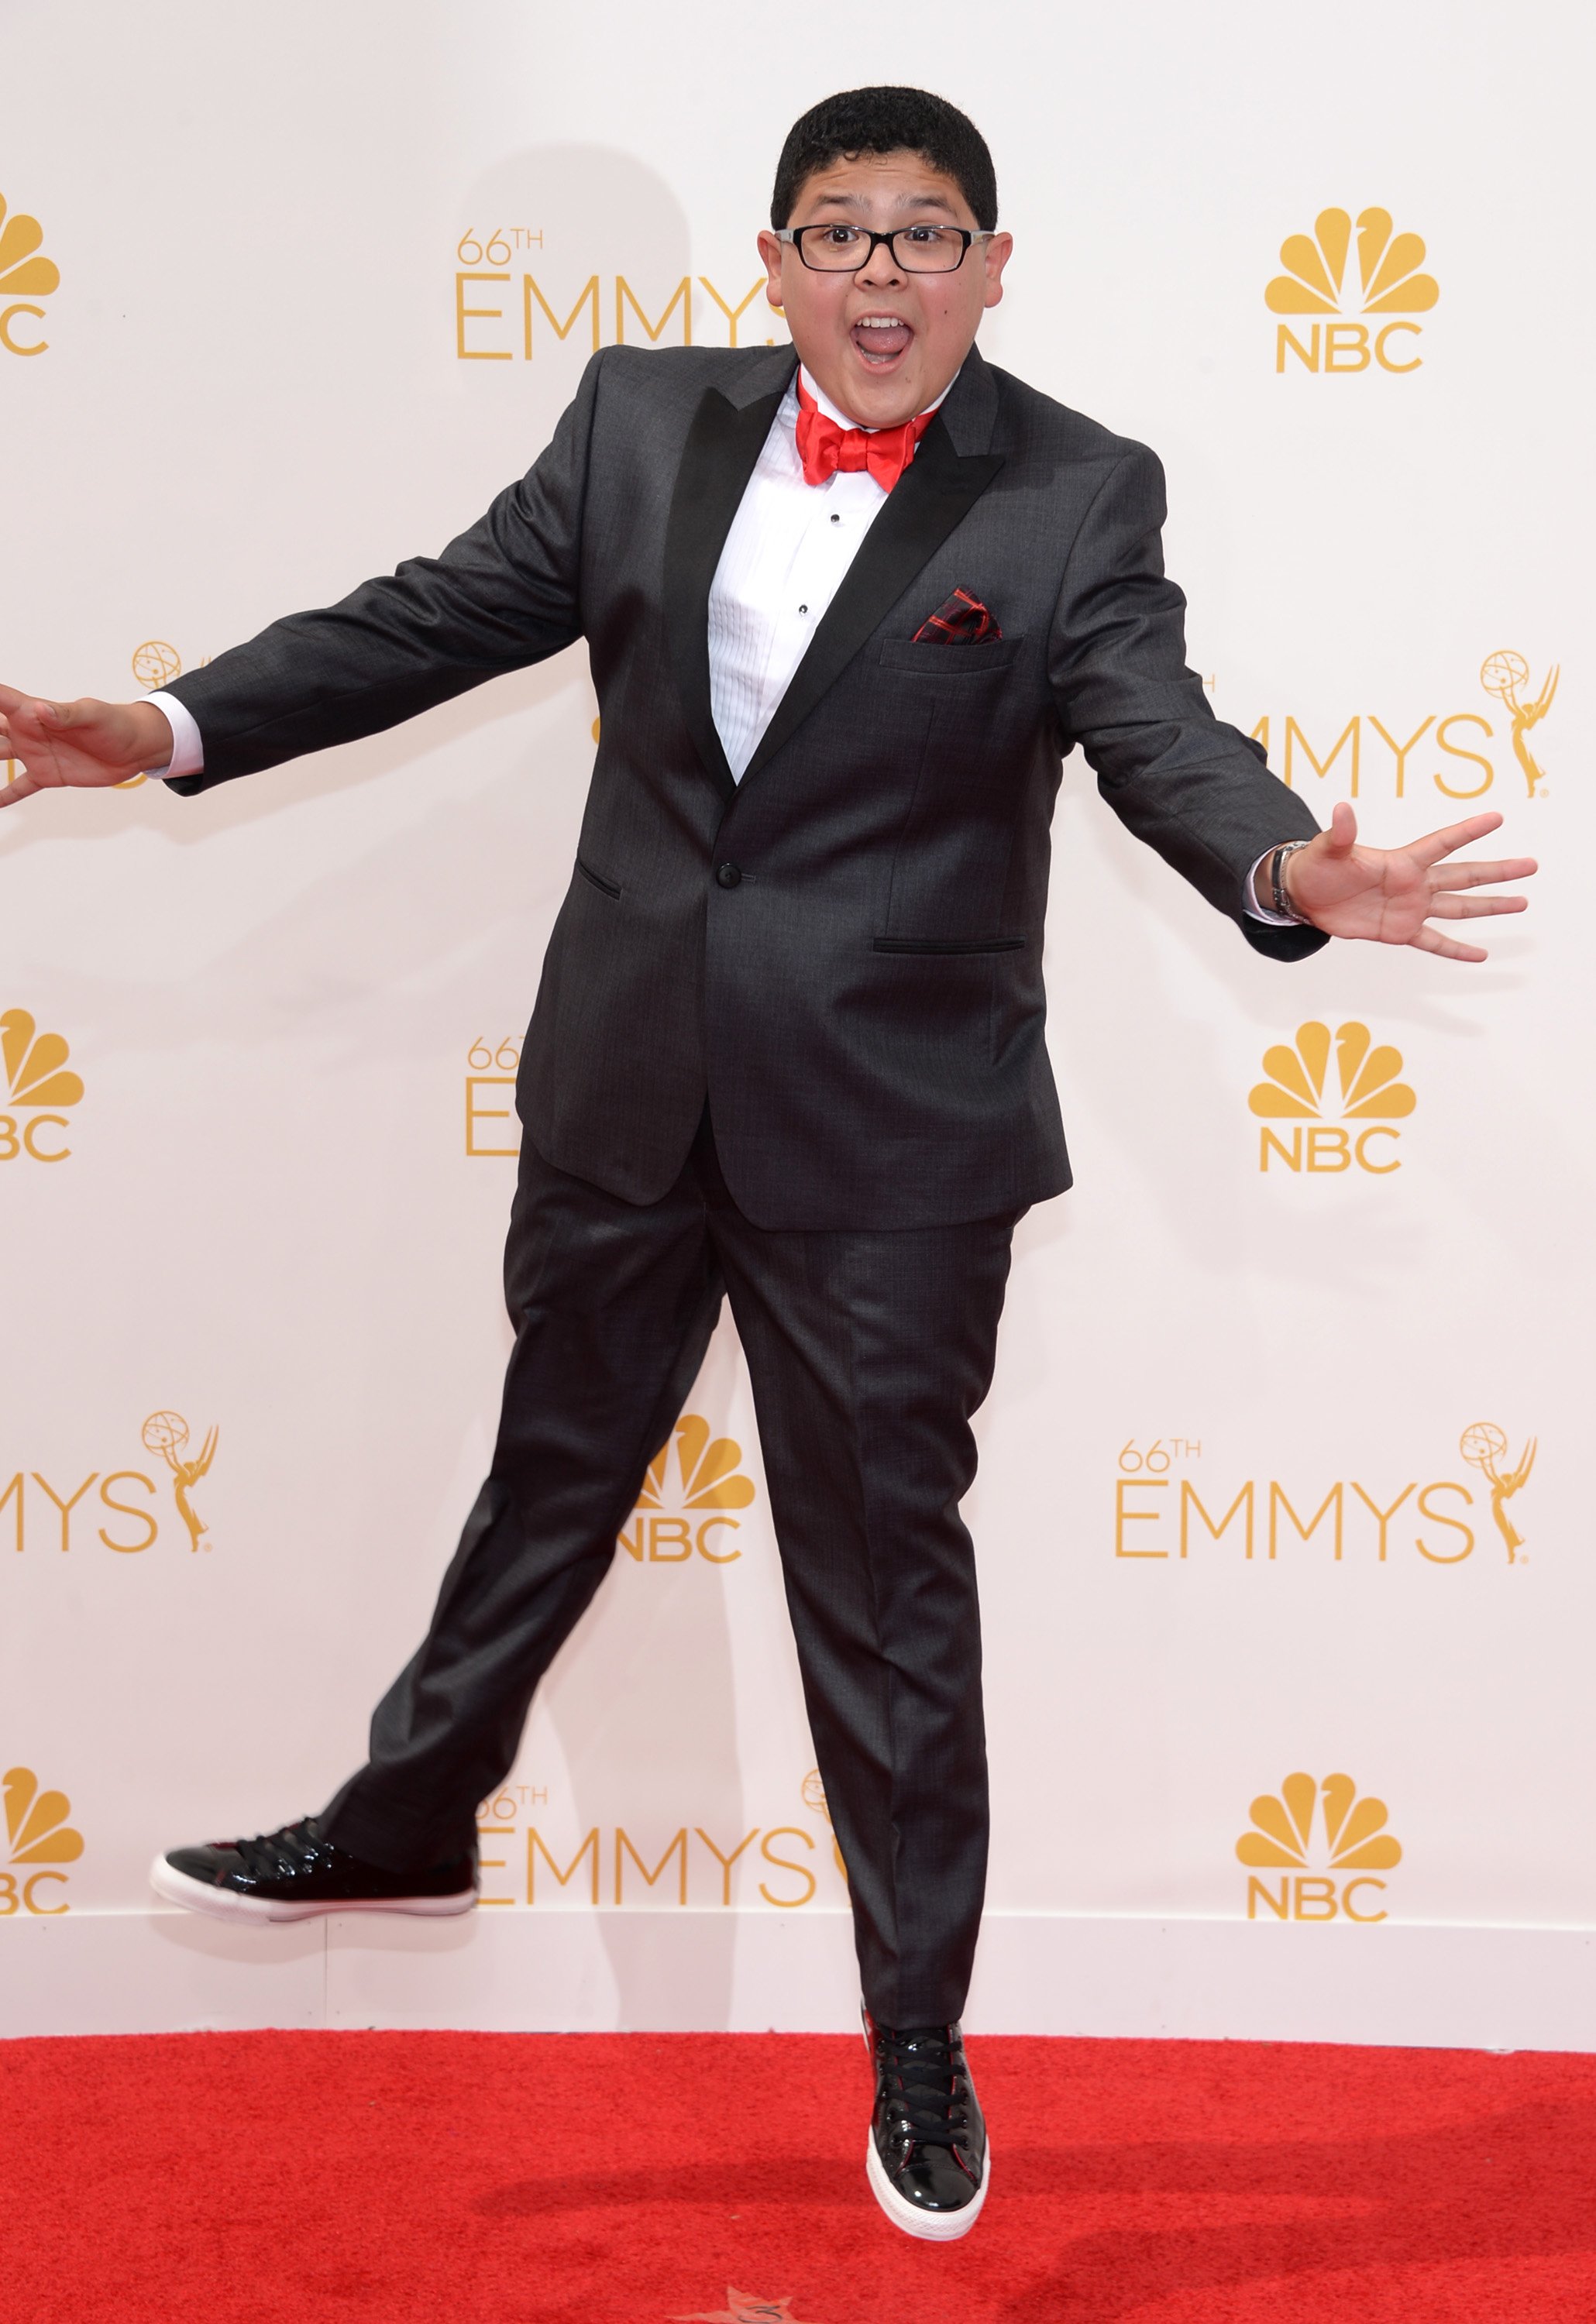 Rico Rodriguez arrives at the 66th Primetime Emmy Awards at the Nokia Theatre L.A. Live on Monday, Aug. 25, 2014, in Los Angeles.